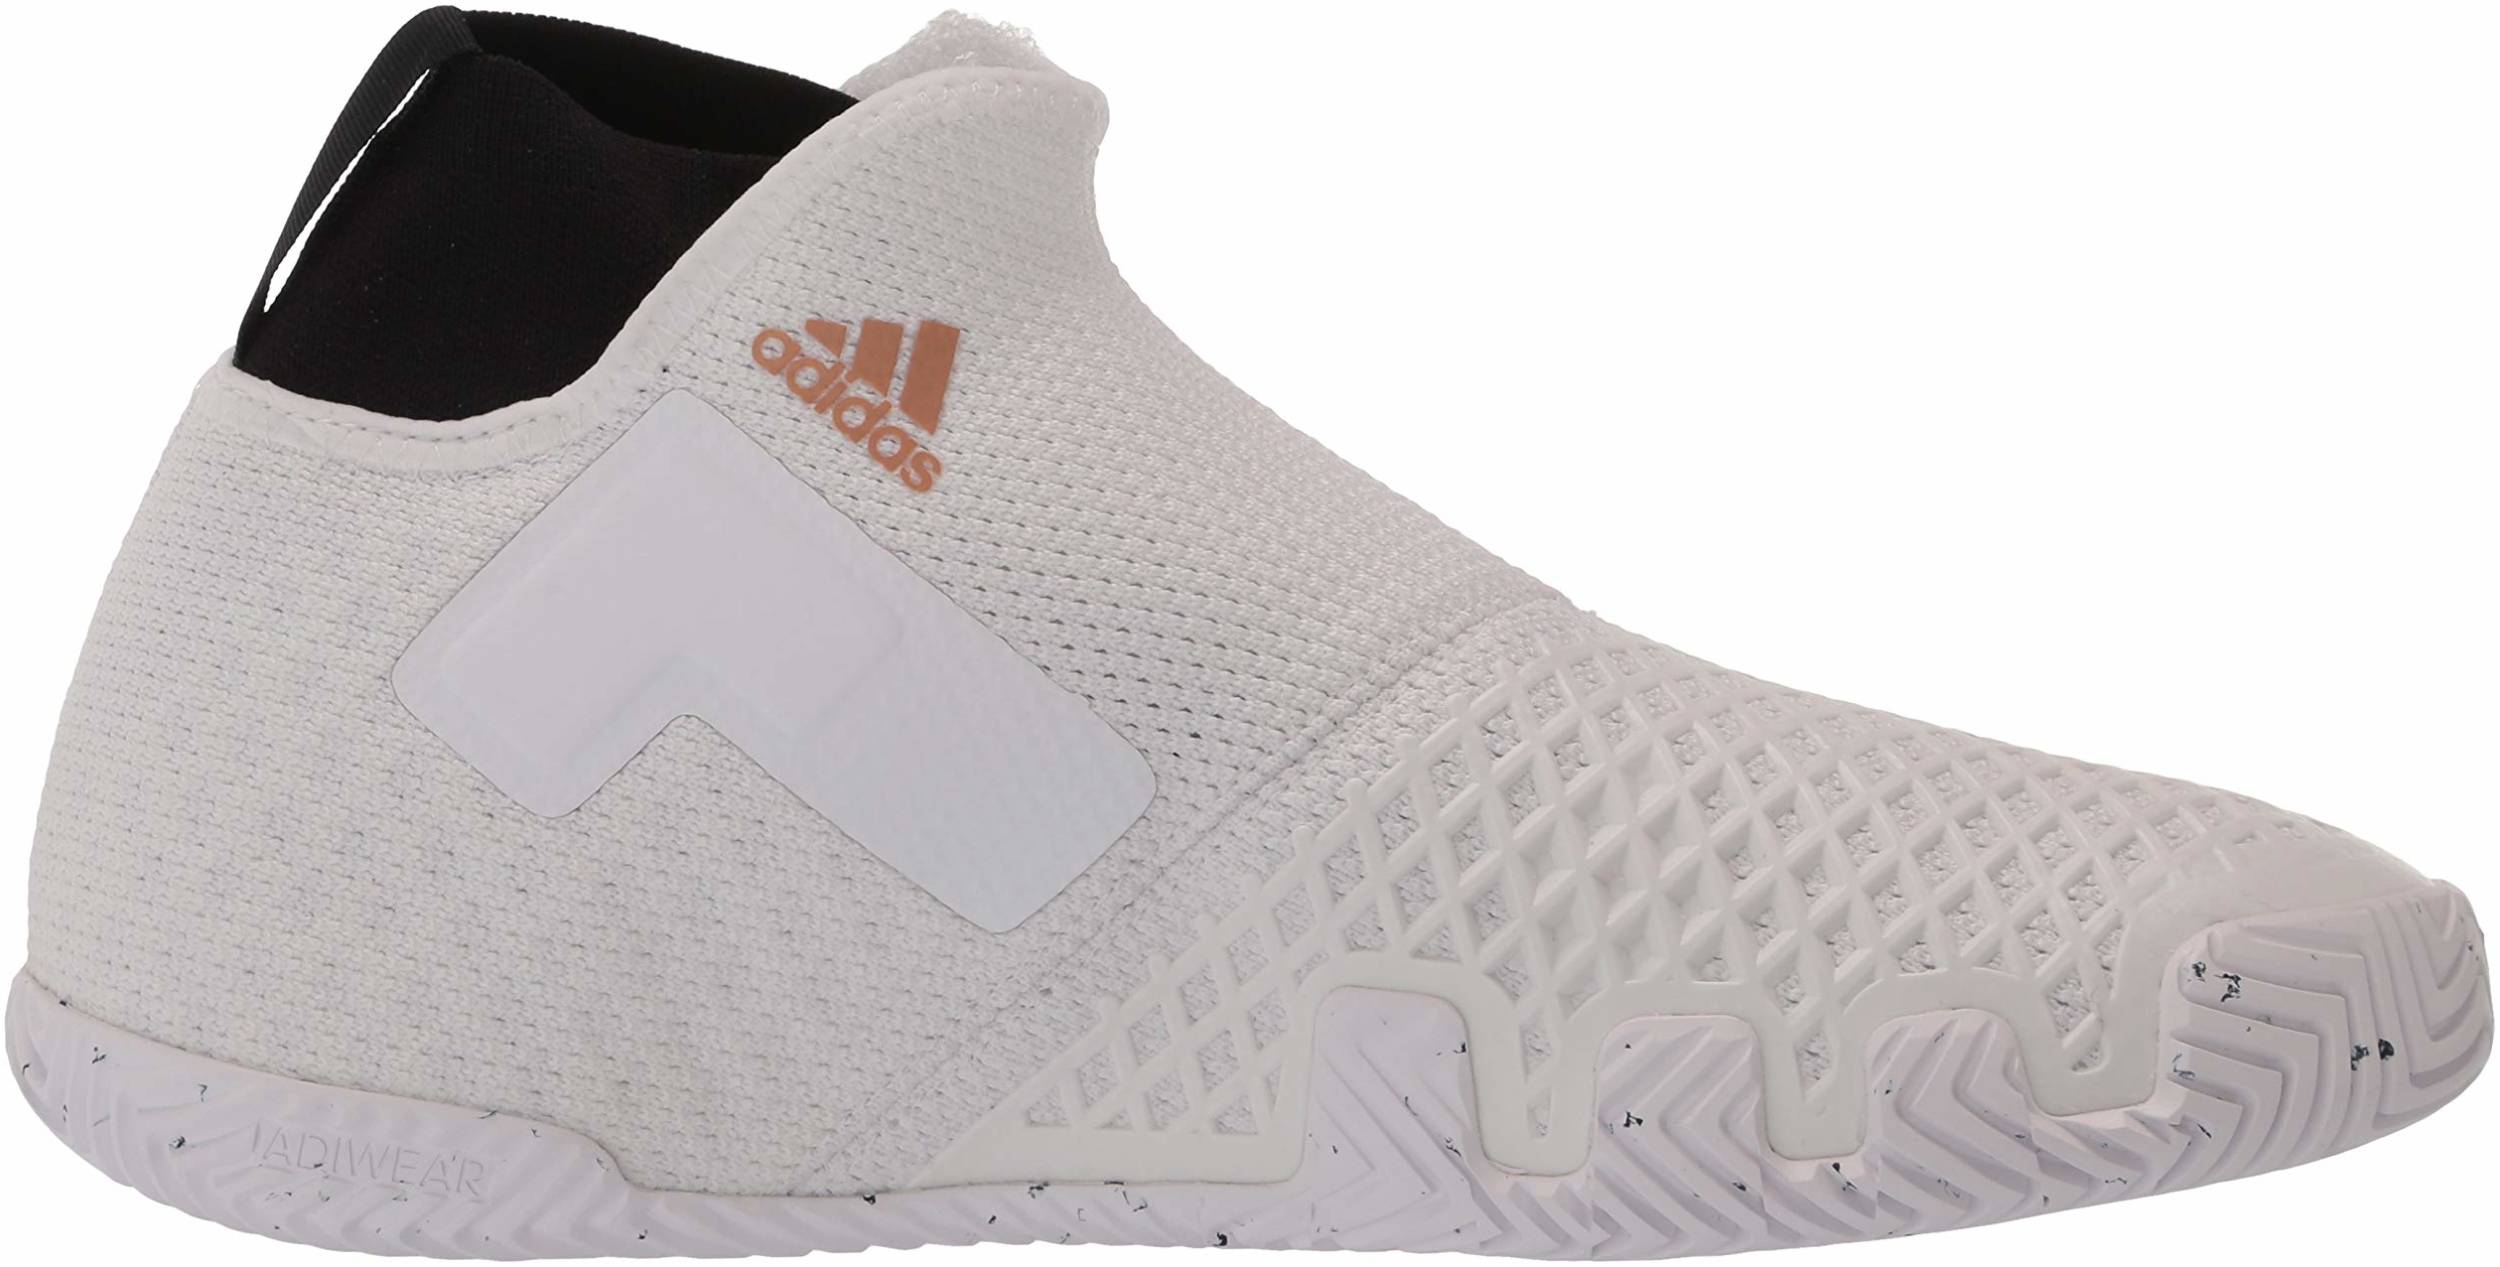 10+ White Adidas tennis shoes: Save up to 51% | RunRepeat